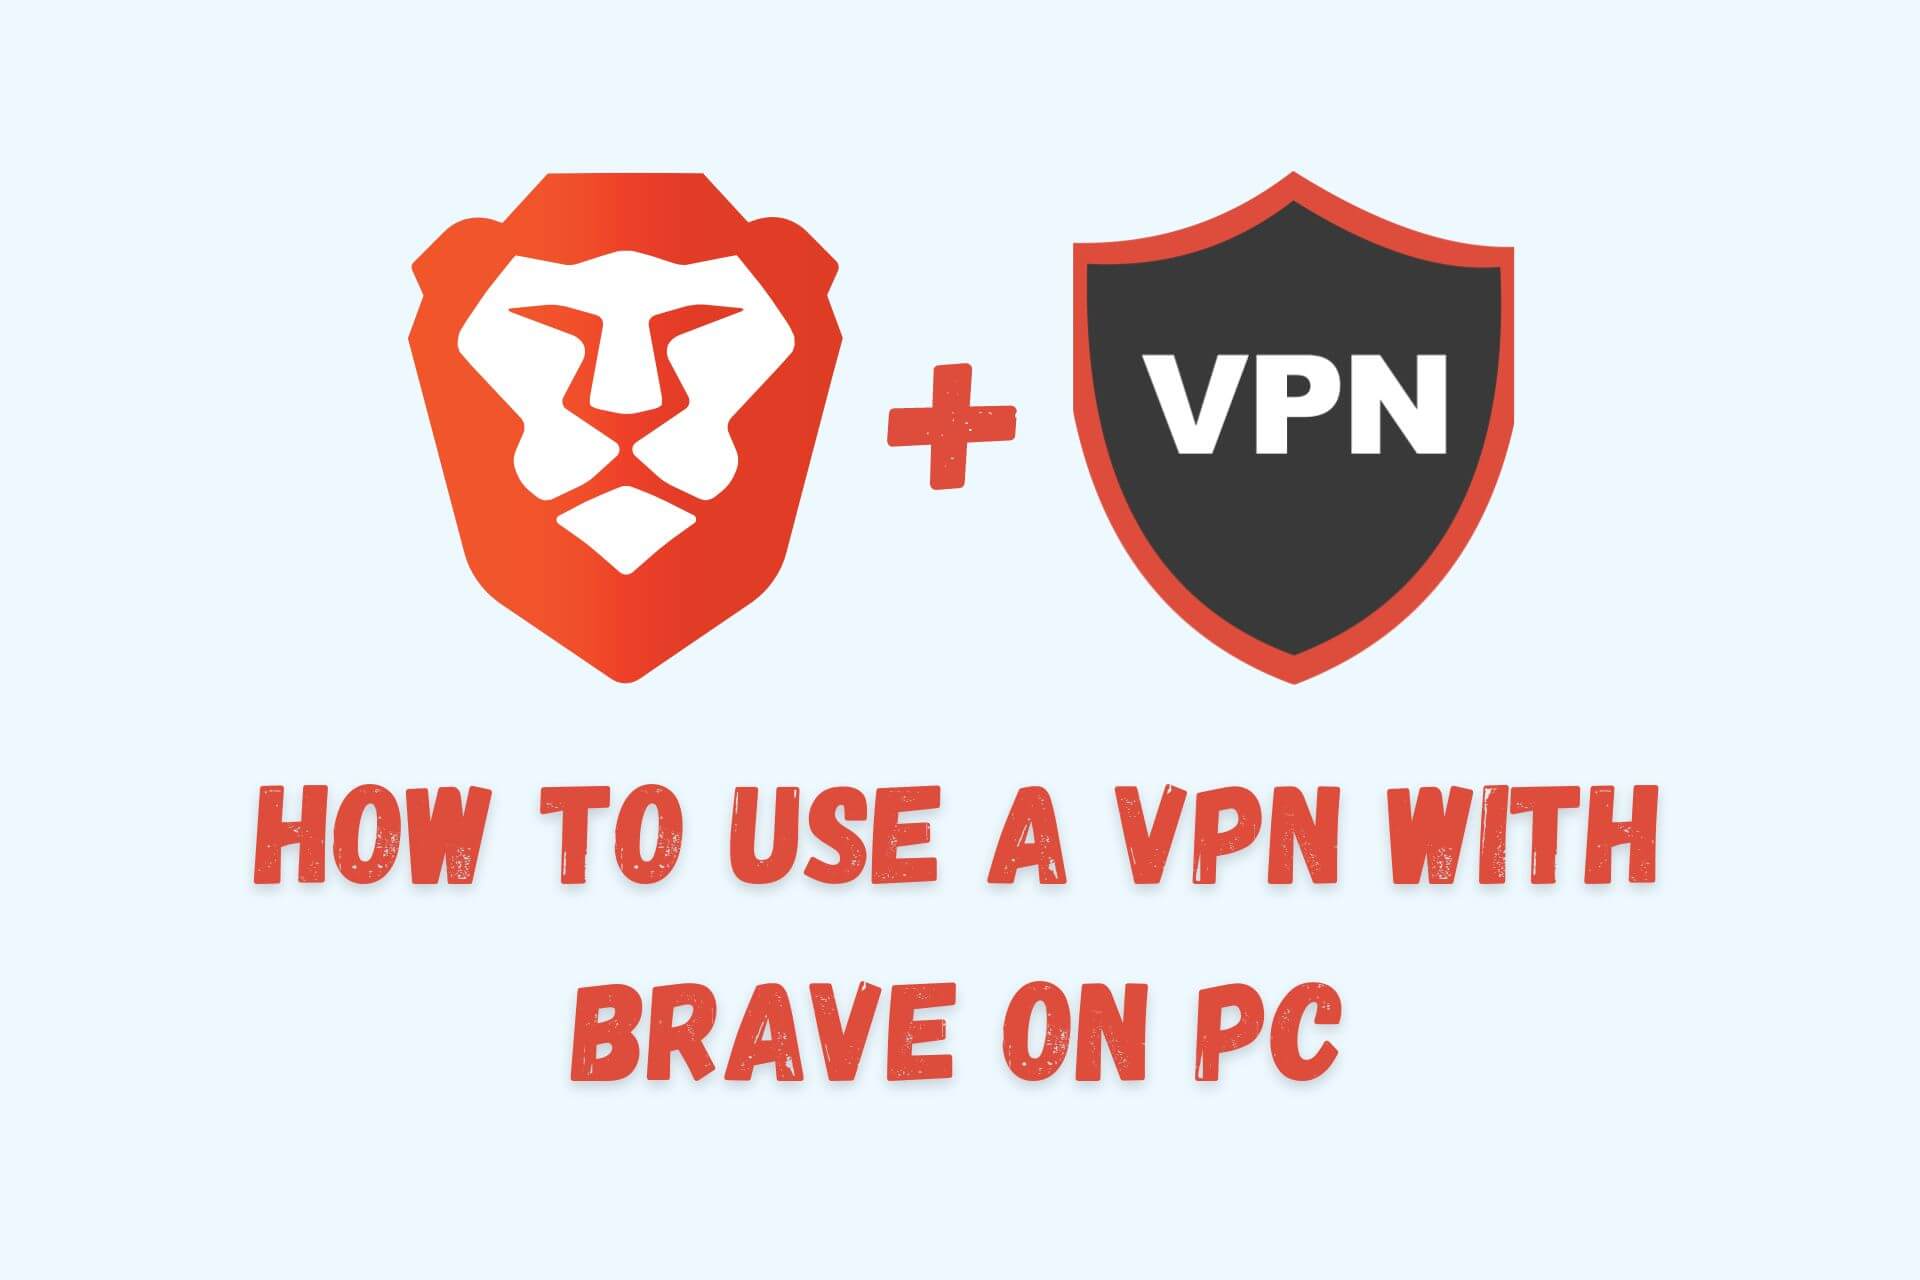 How to Use a VPN with Brave Browser on PC